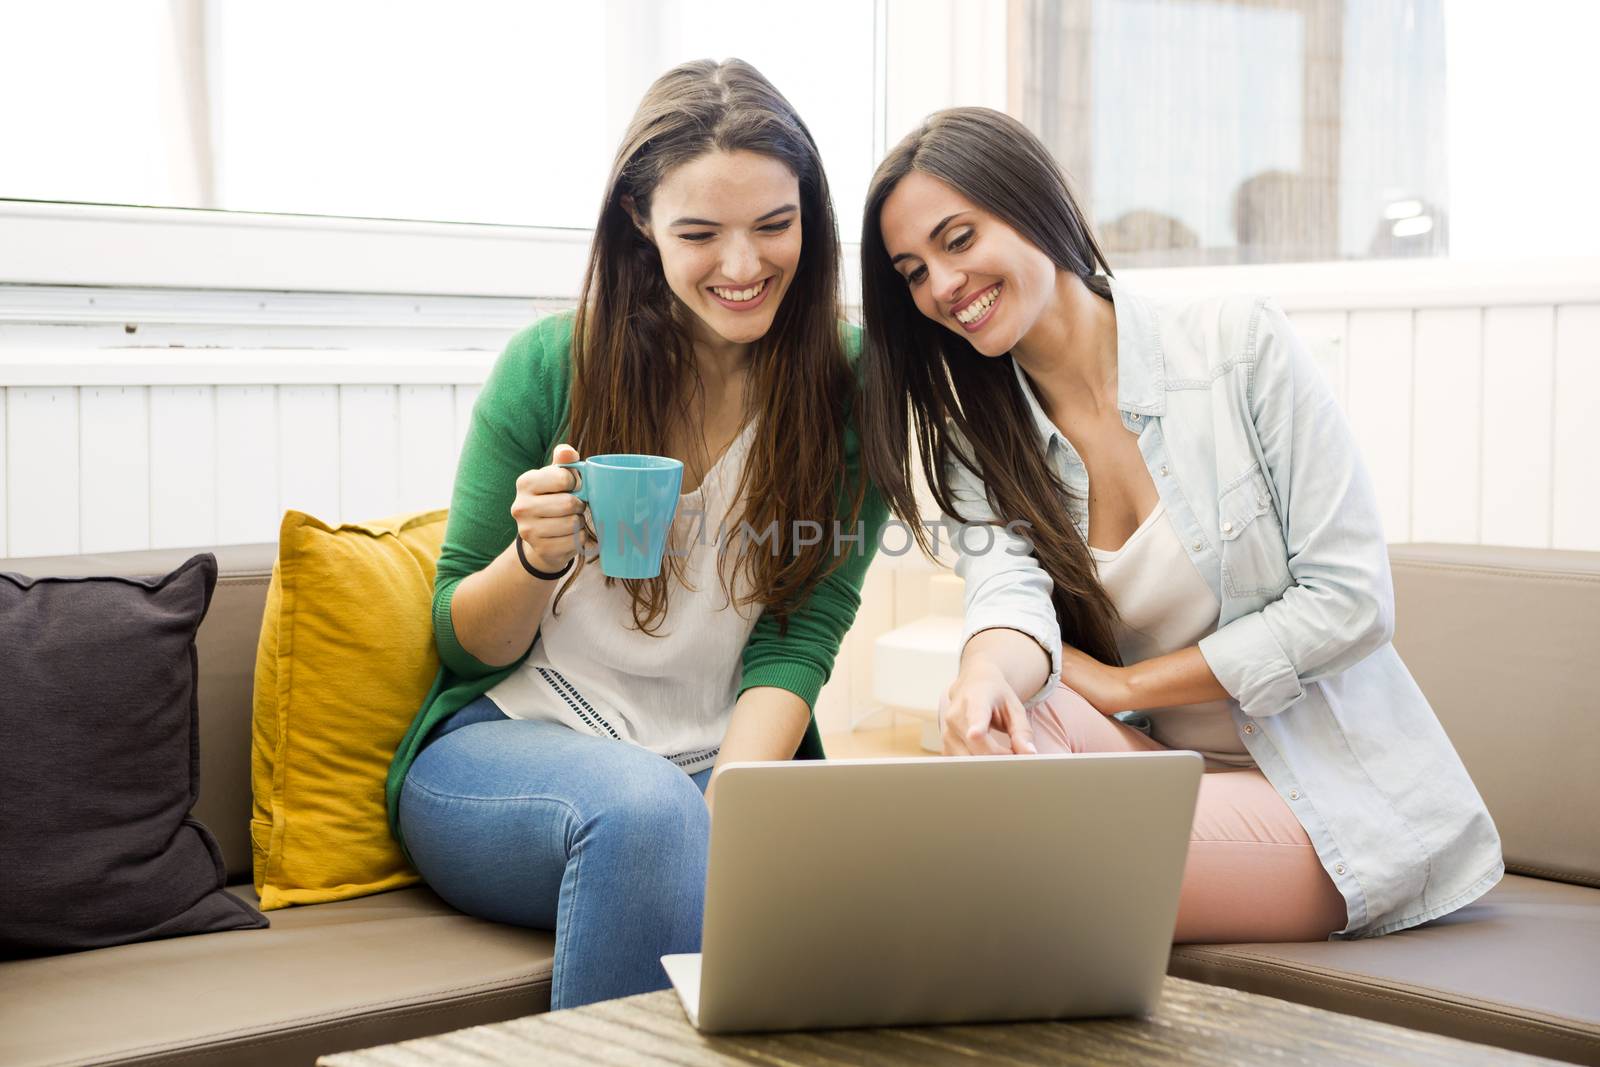 Female friends at the local coffee shop drinking coffee and working